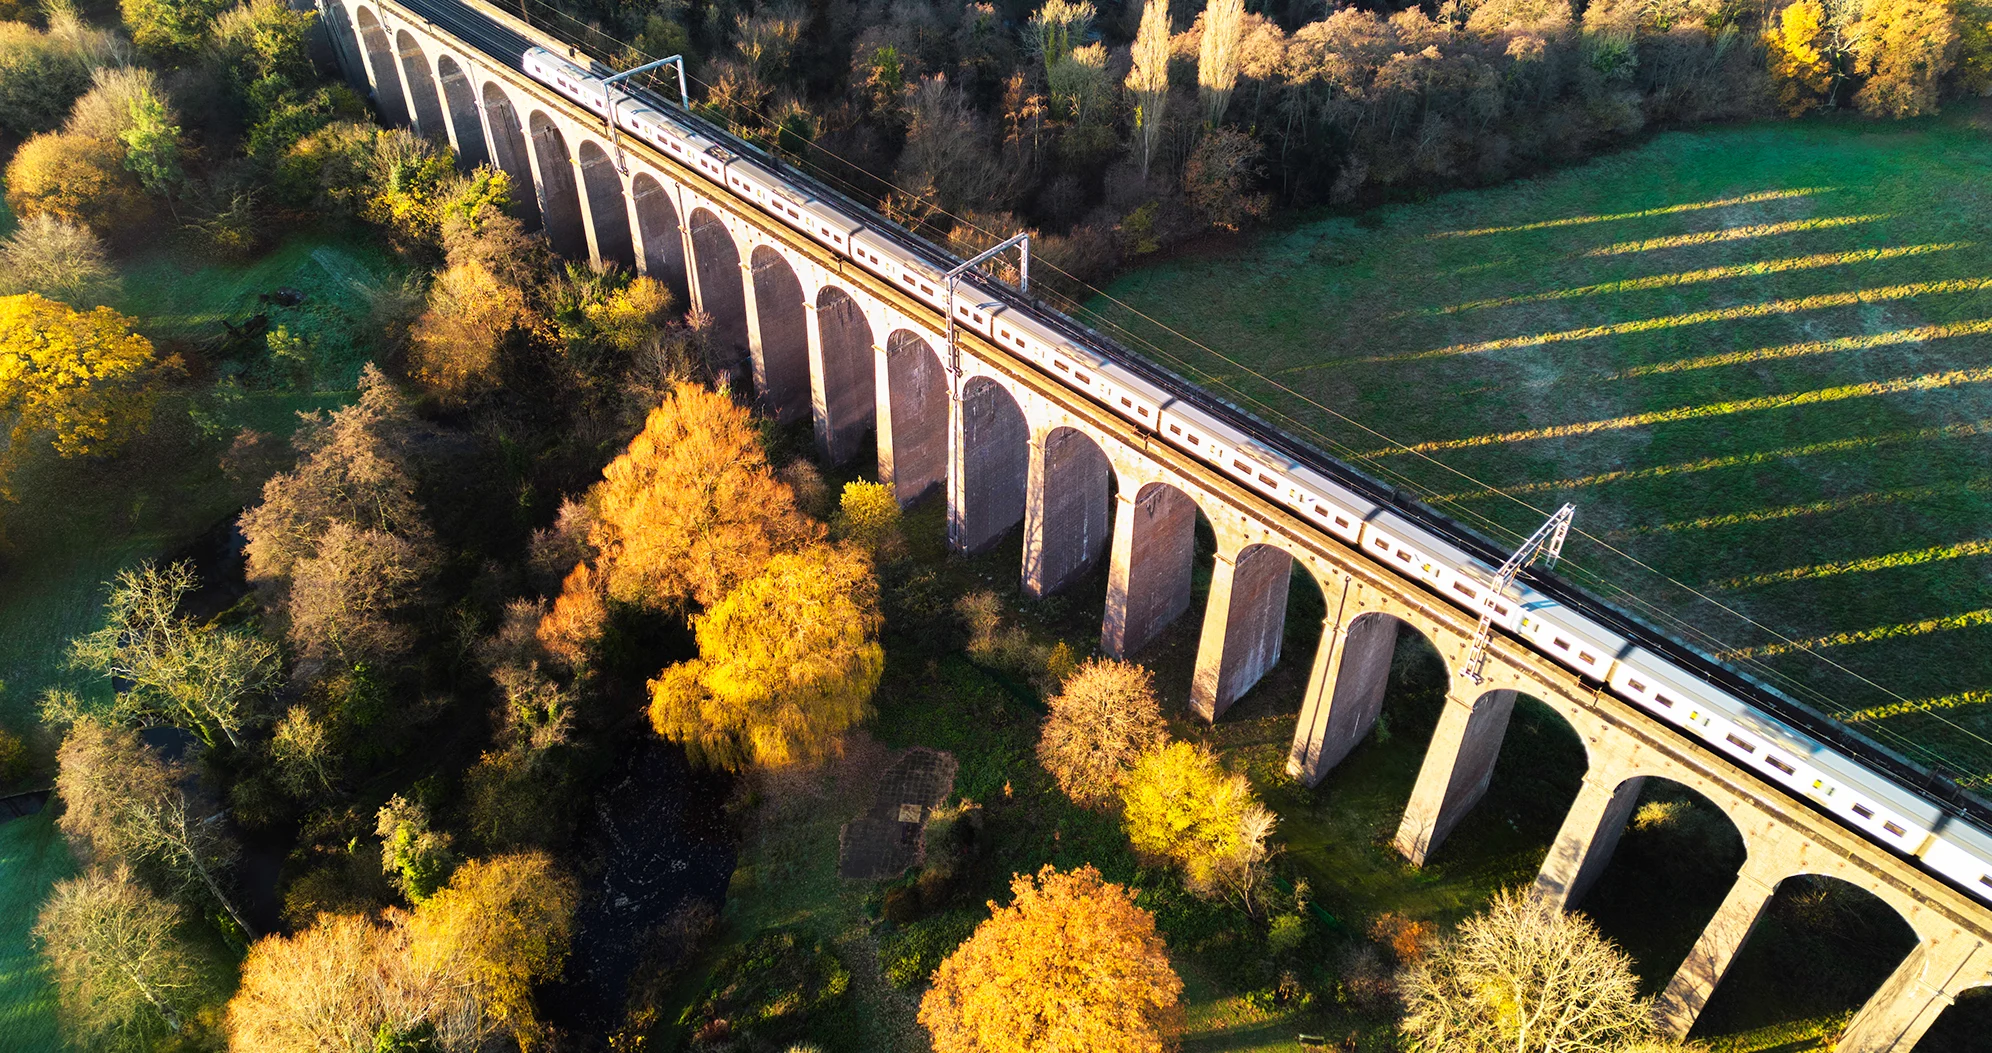 A train crosses a viaduct with fields and trees covered in autumn leaves below